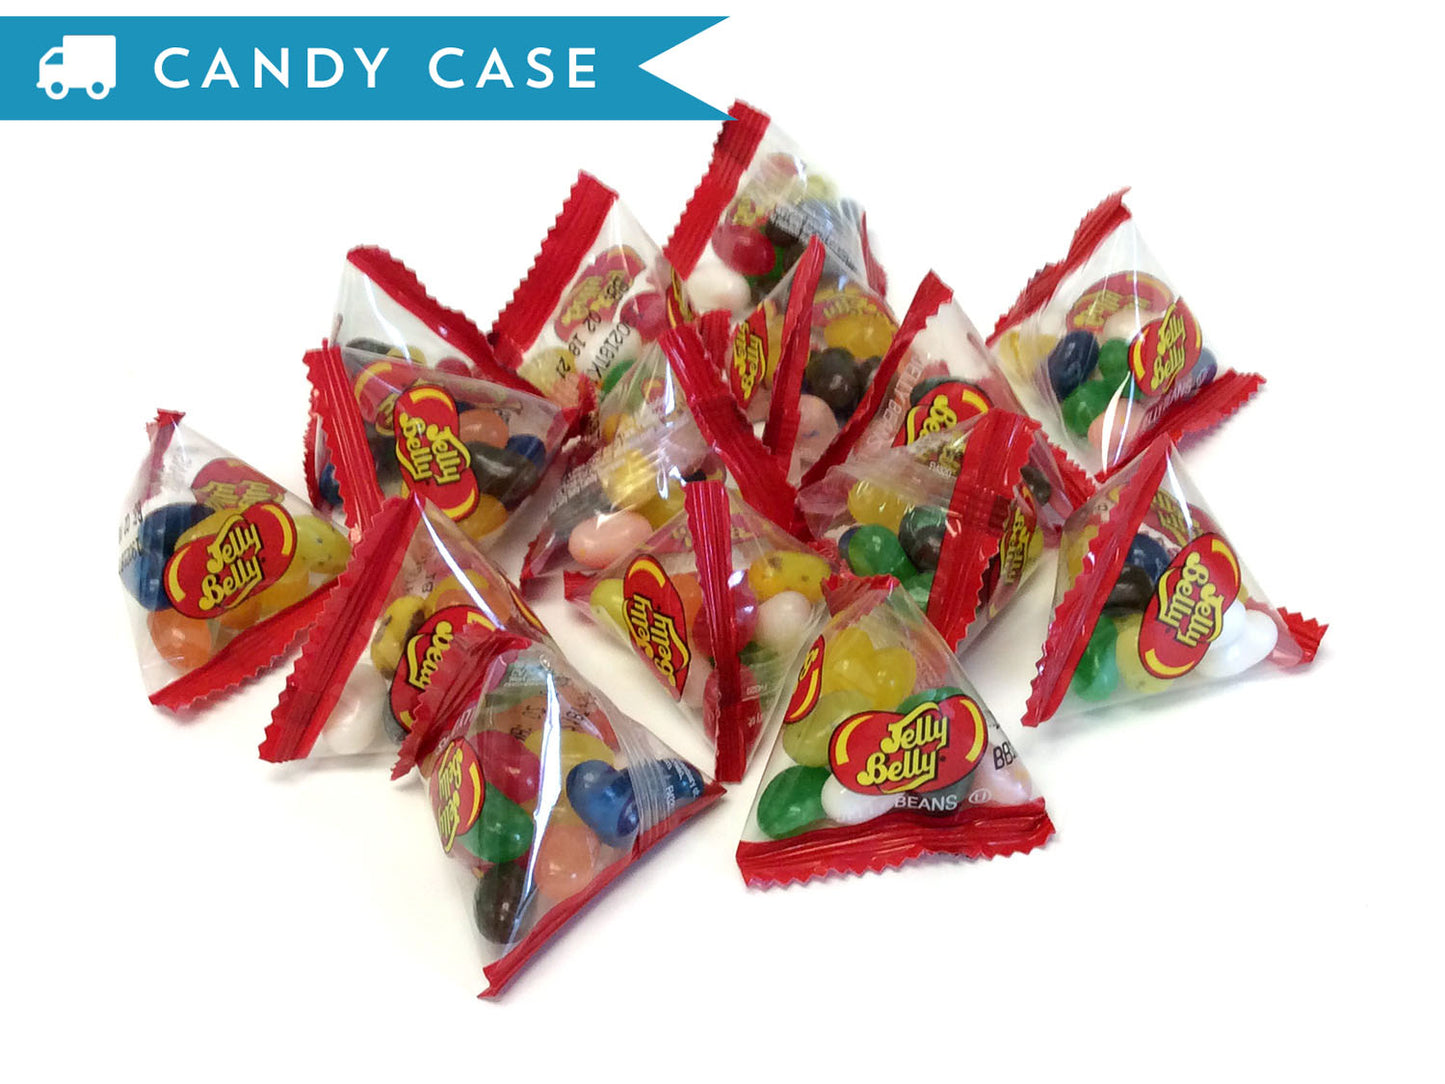 Jelly Belly Pyramid Bags - 6.5 lb case